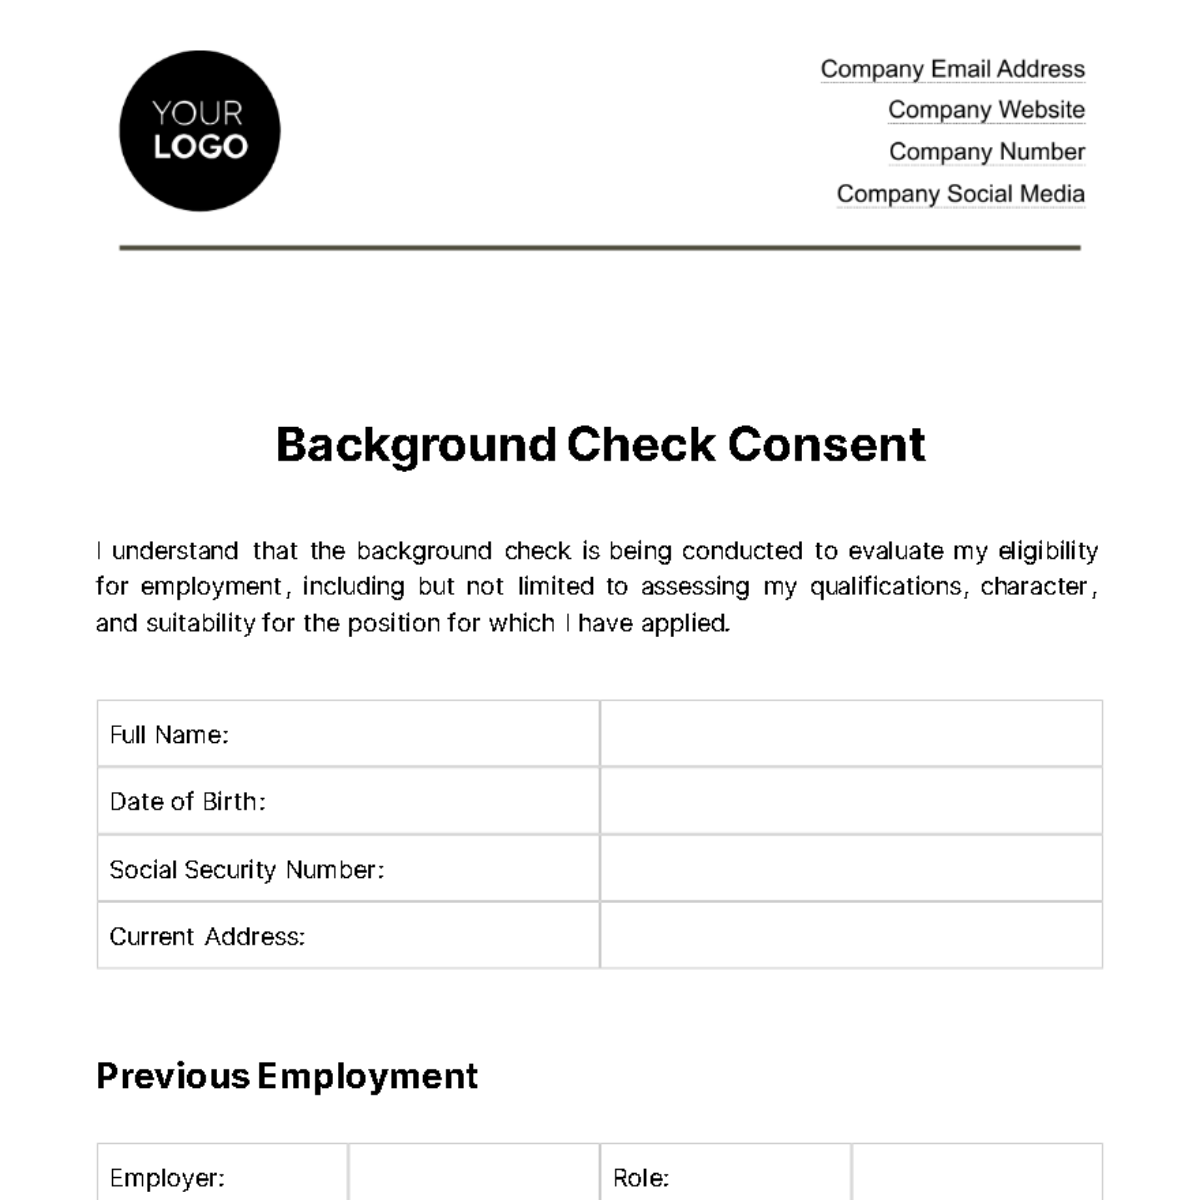 Free Background Check Consent HR Template